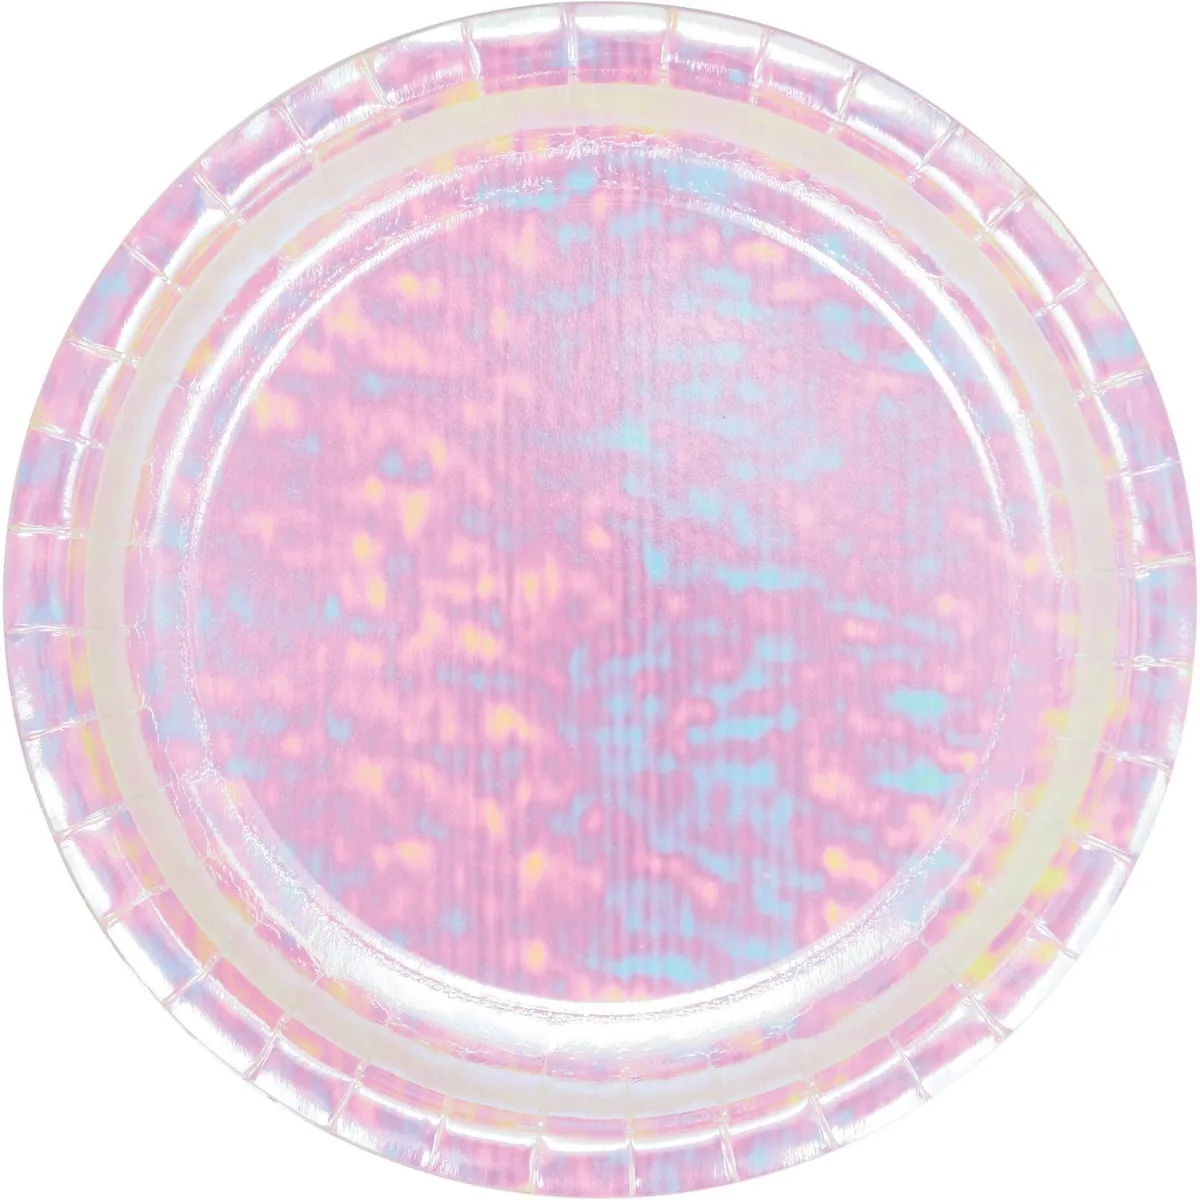 

Iridescent Party Round Paper Plates 24 Count for 24 Guests